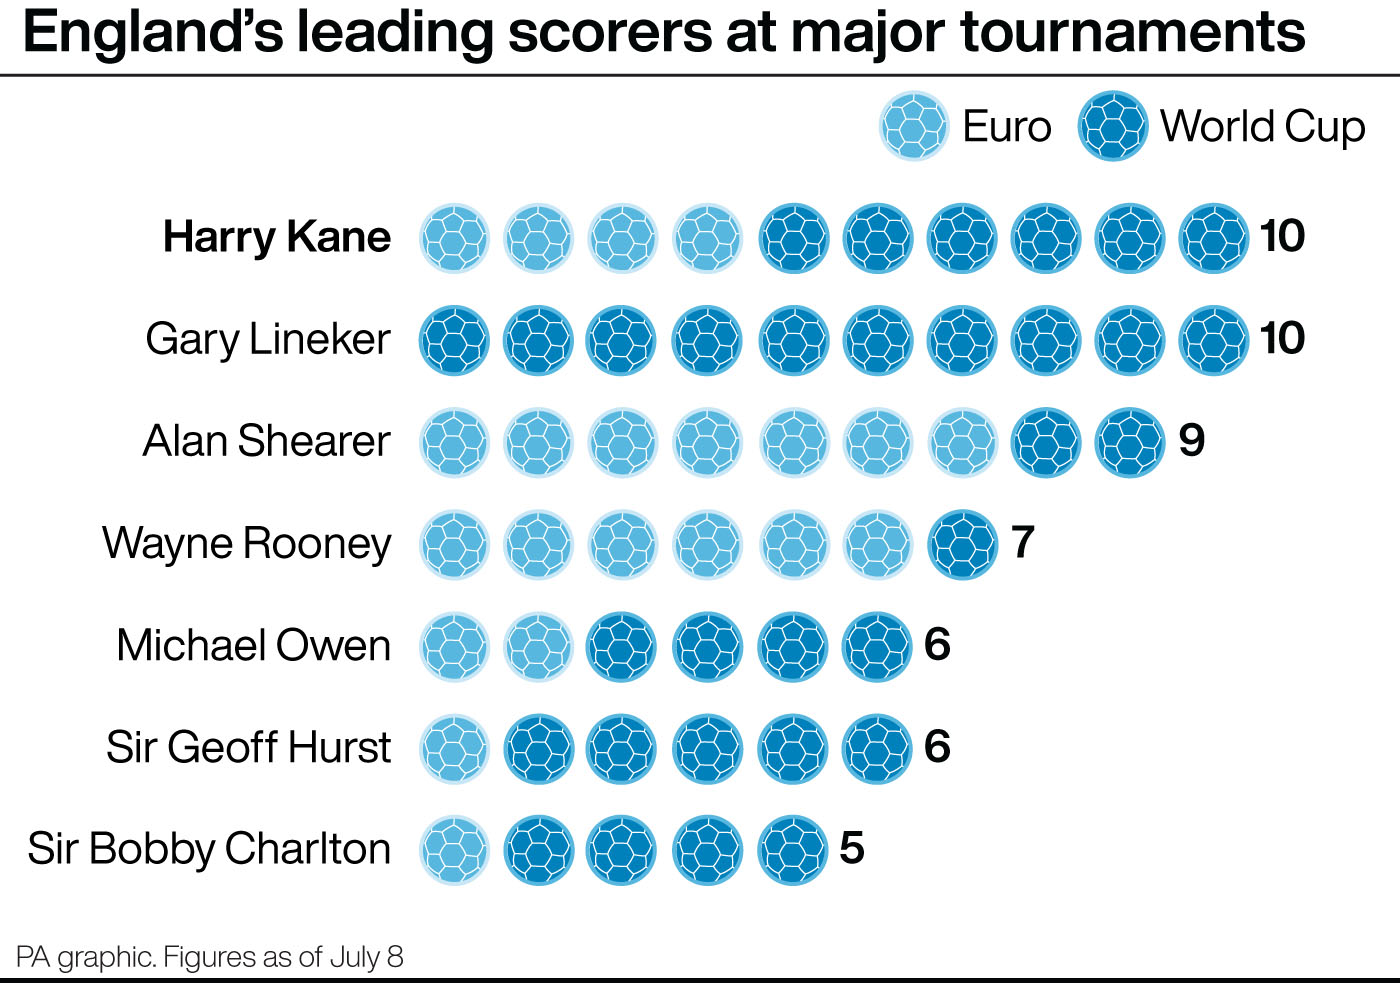 England's leading scorers at major tournaments